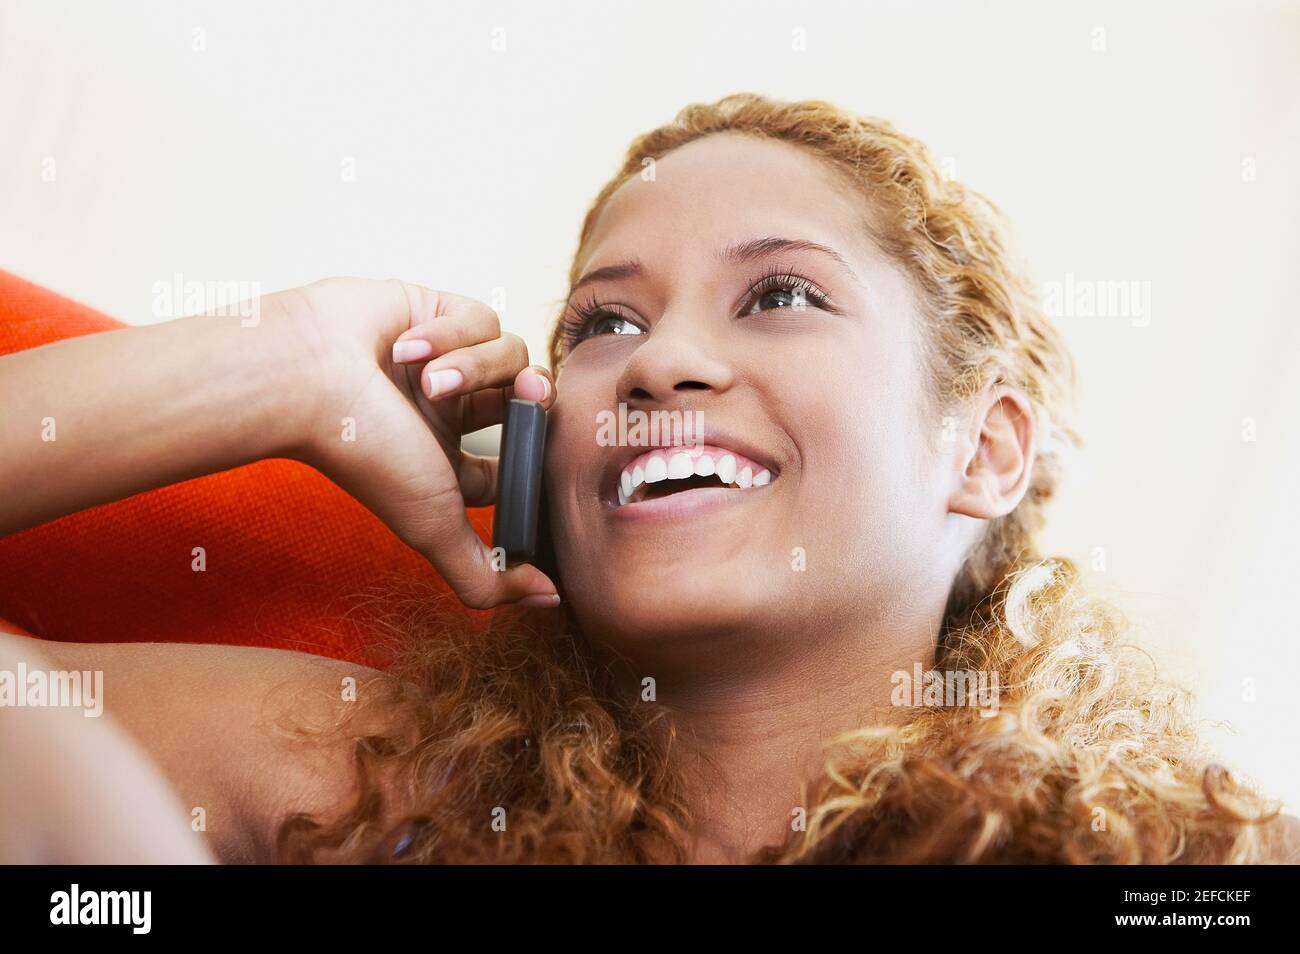 Close up of a young woman talking on a mobile phone and smiling Stock Photo